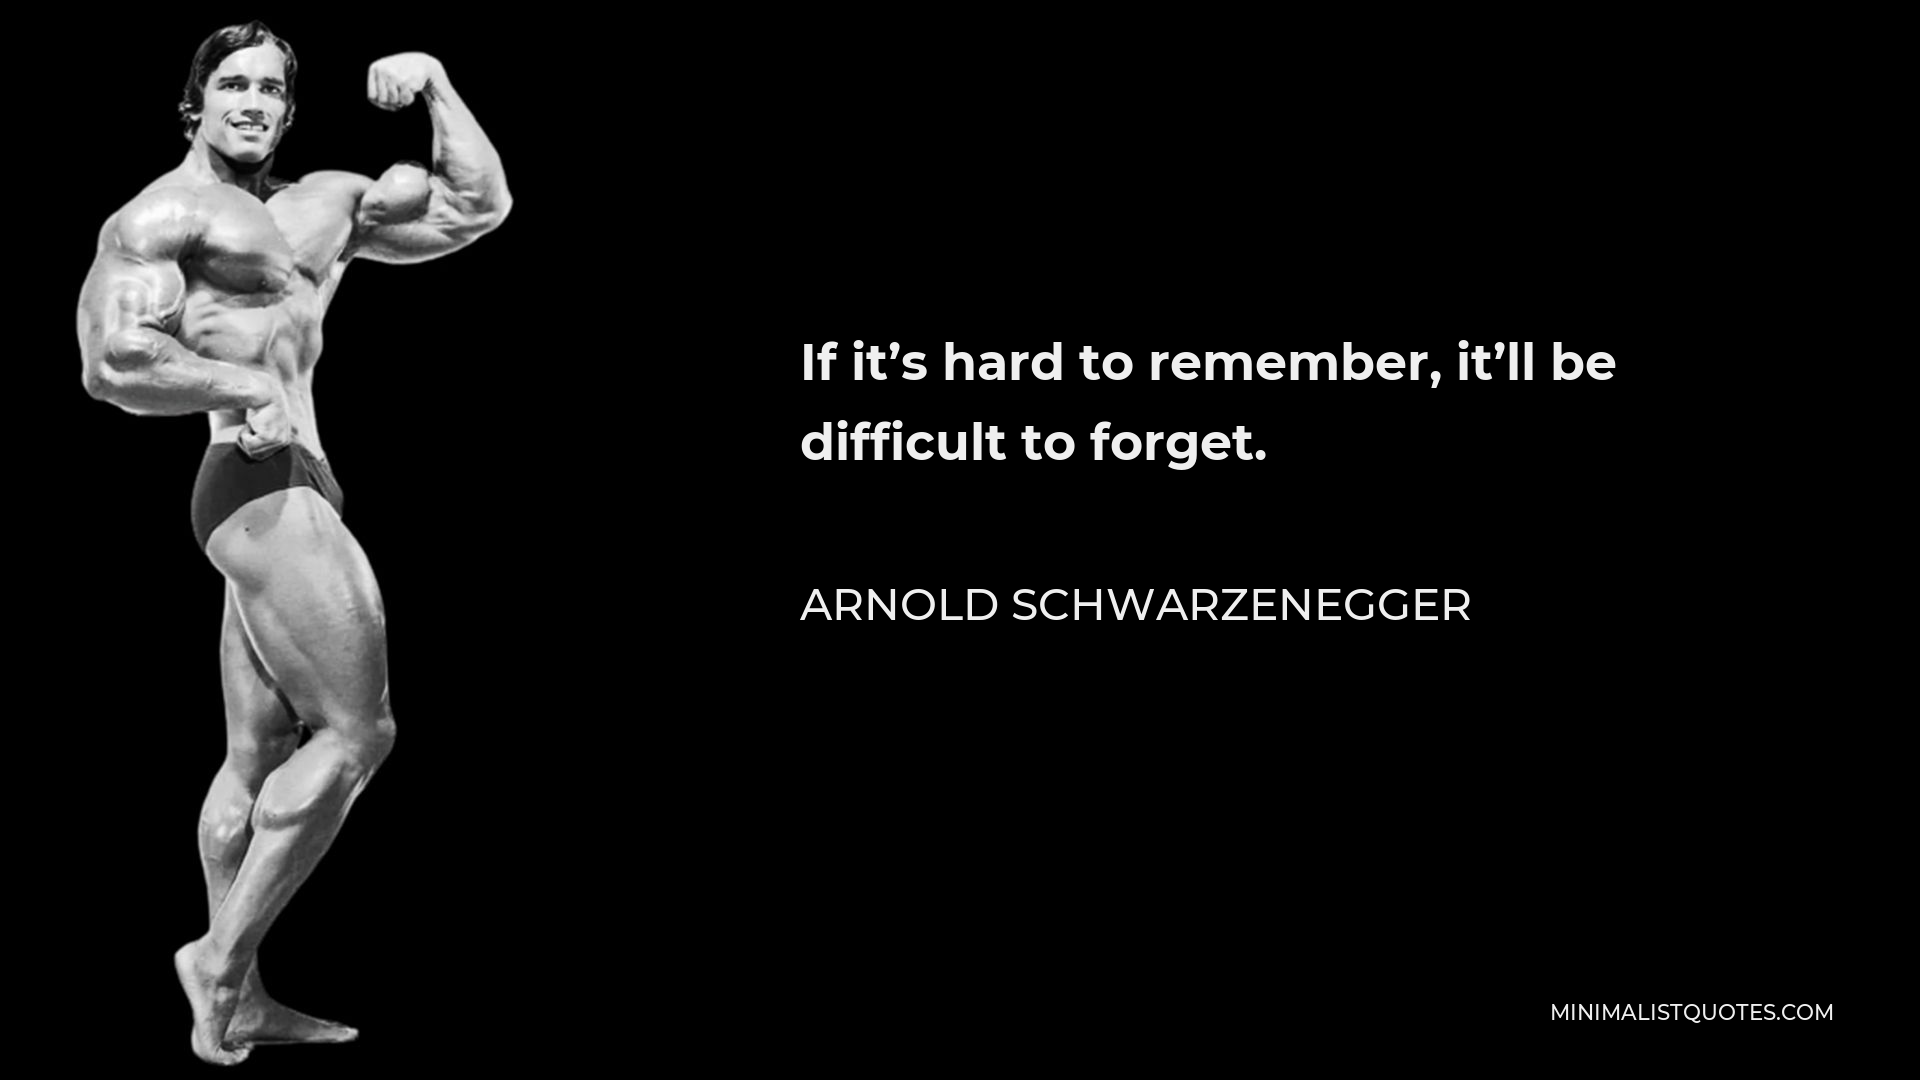 Arnold Schwarzenegger Quote - If it’s hard to remember, it’ll be difficult to forget.